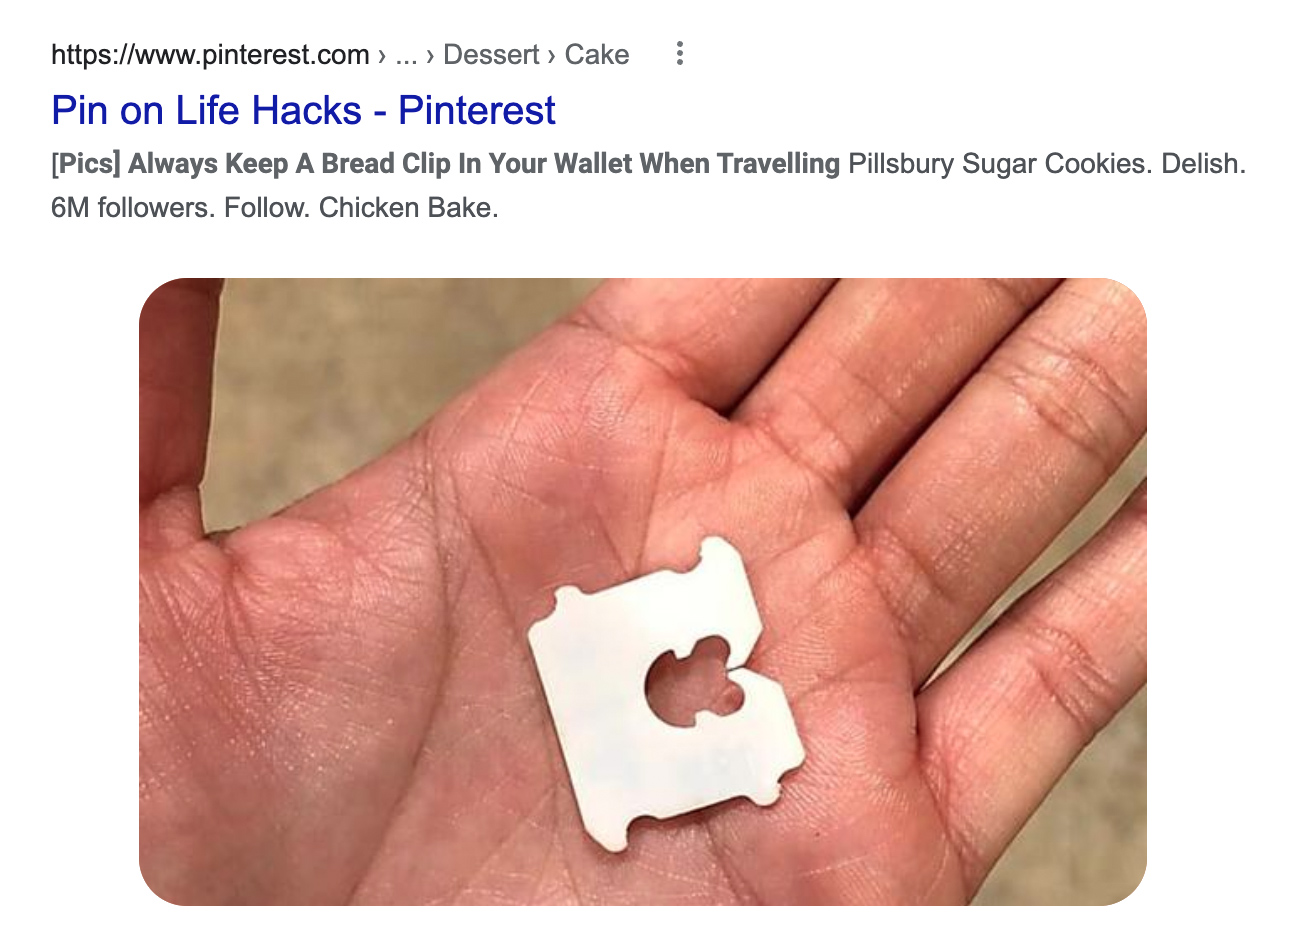 An online advertisement claimed to always keep a bread clip in your wallet when travelling or traveling alone.